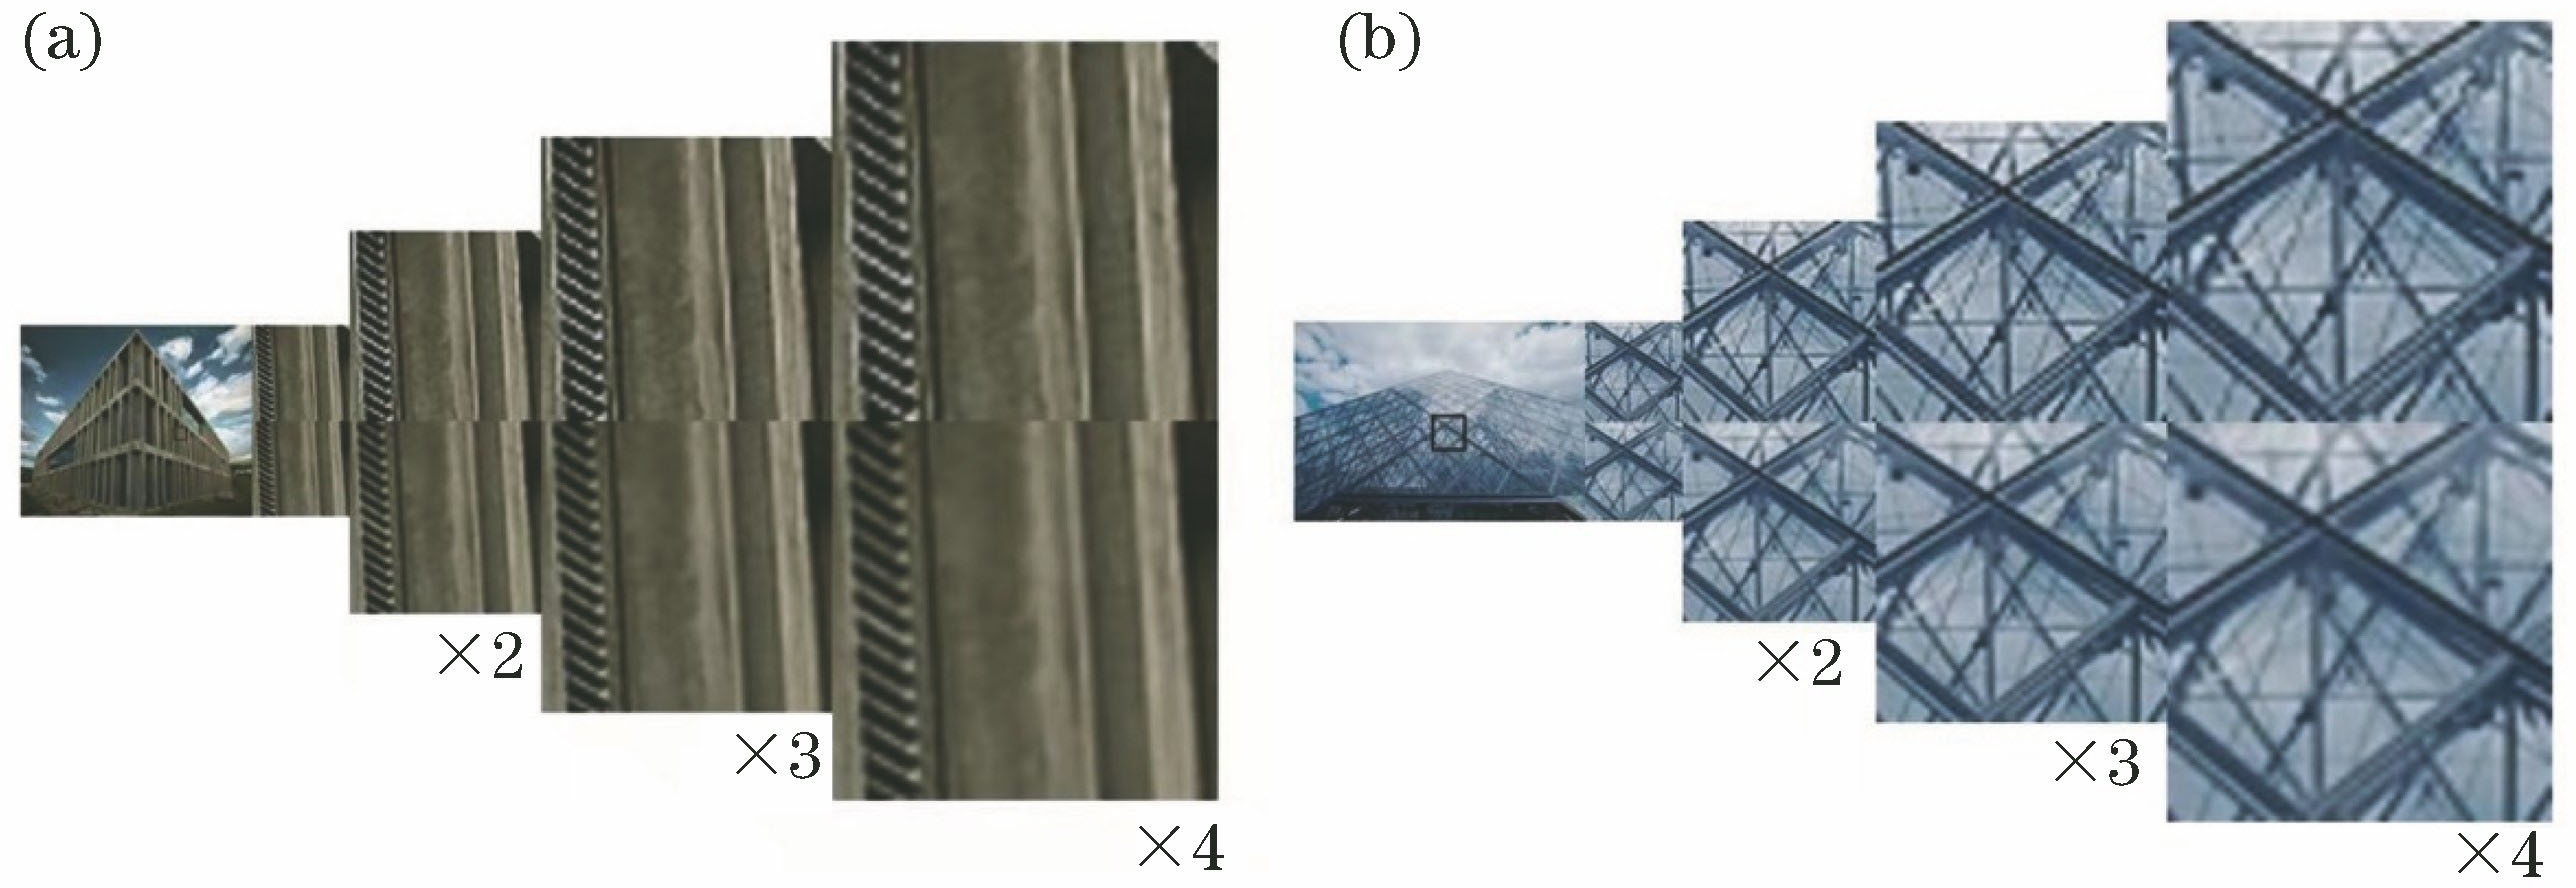 DSSR (top) and LapSRN (bottom) algorithms deal with different images. (a) Images processed with different scale factors; (b) building edges result